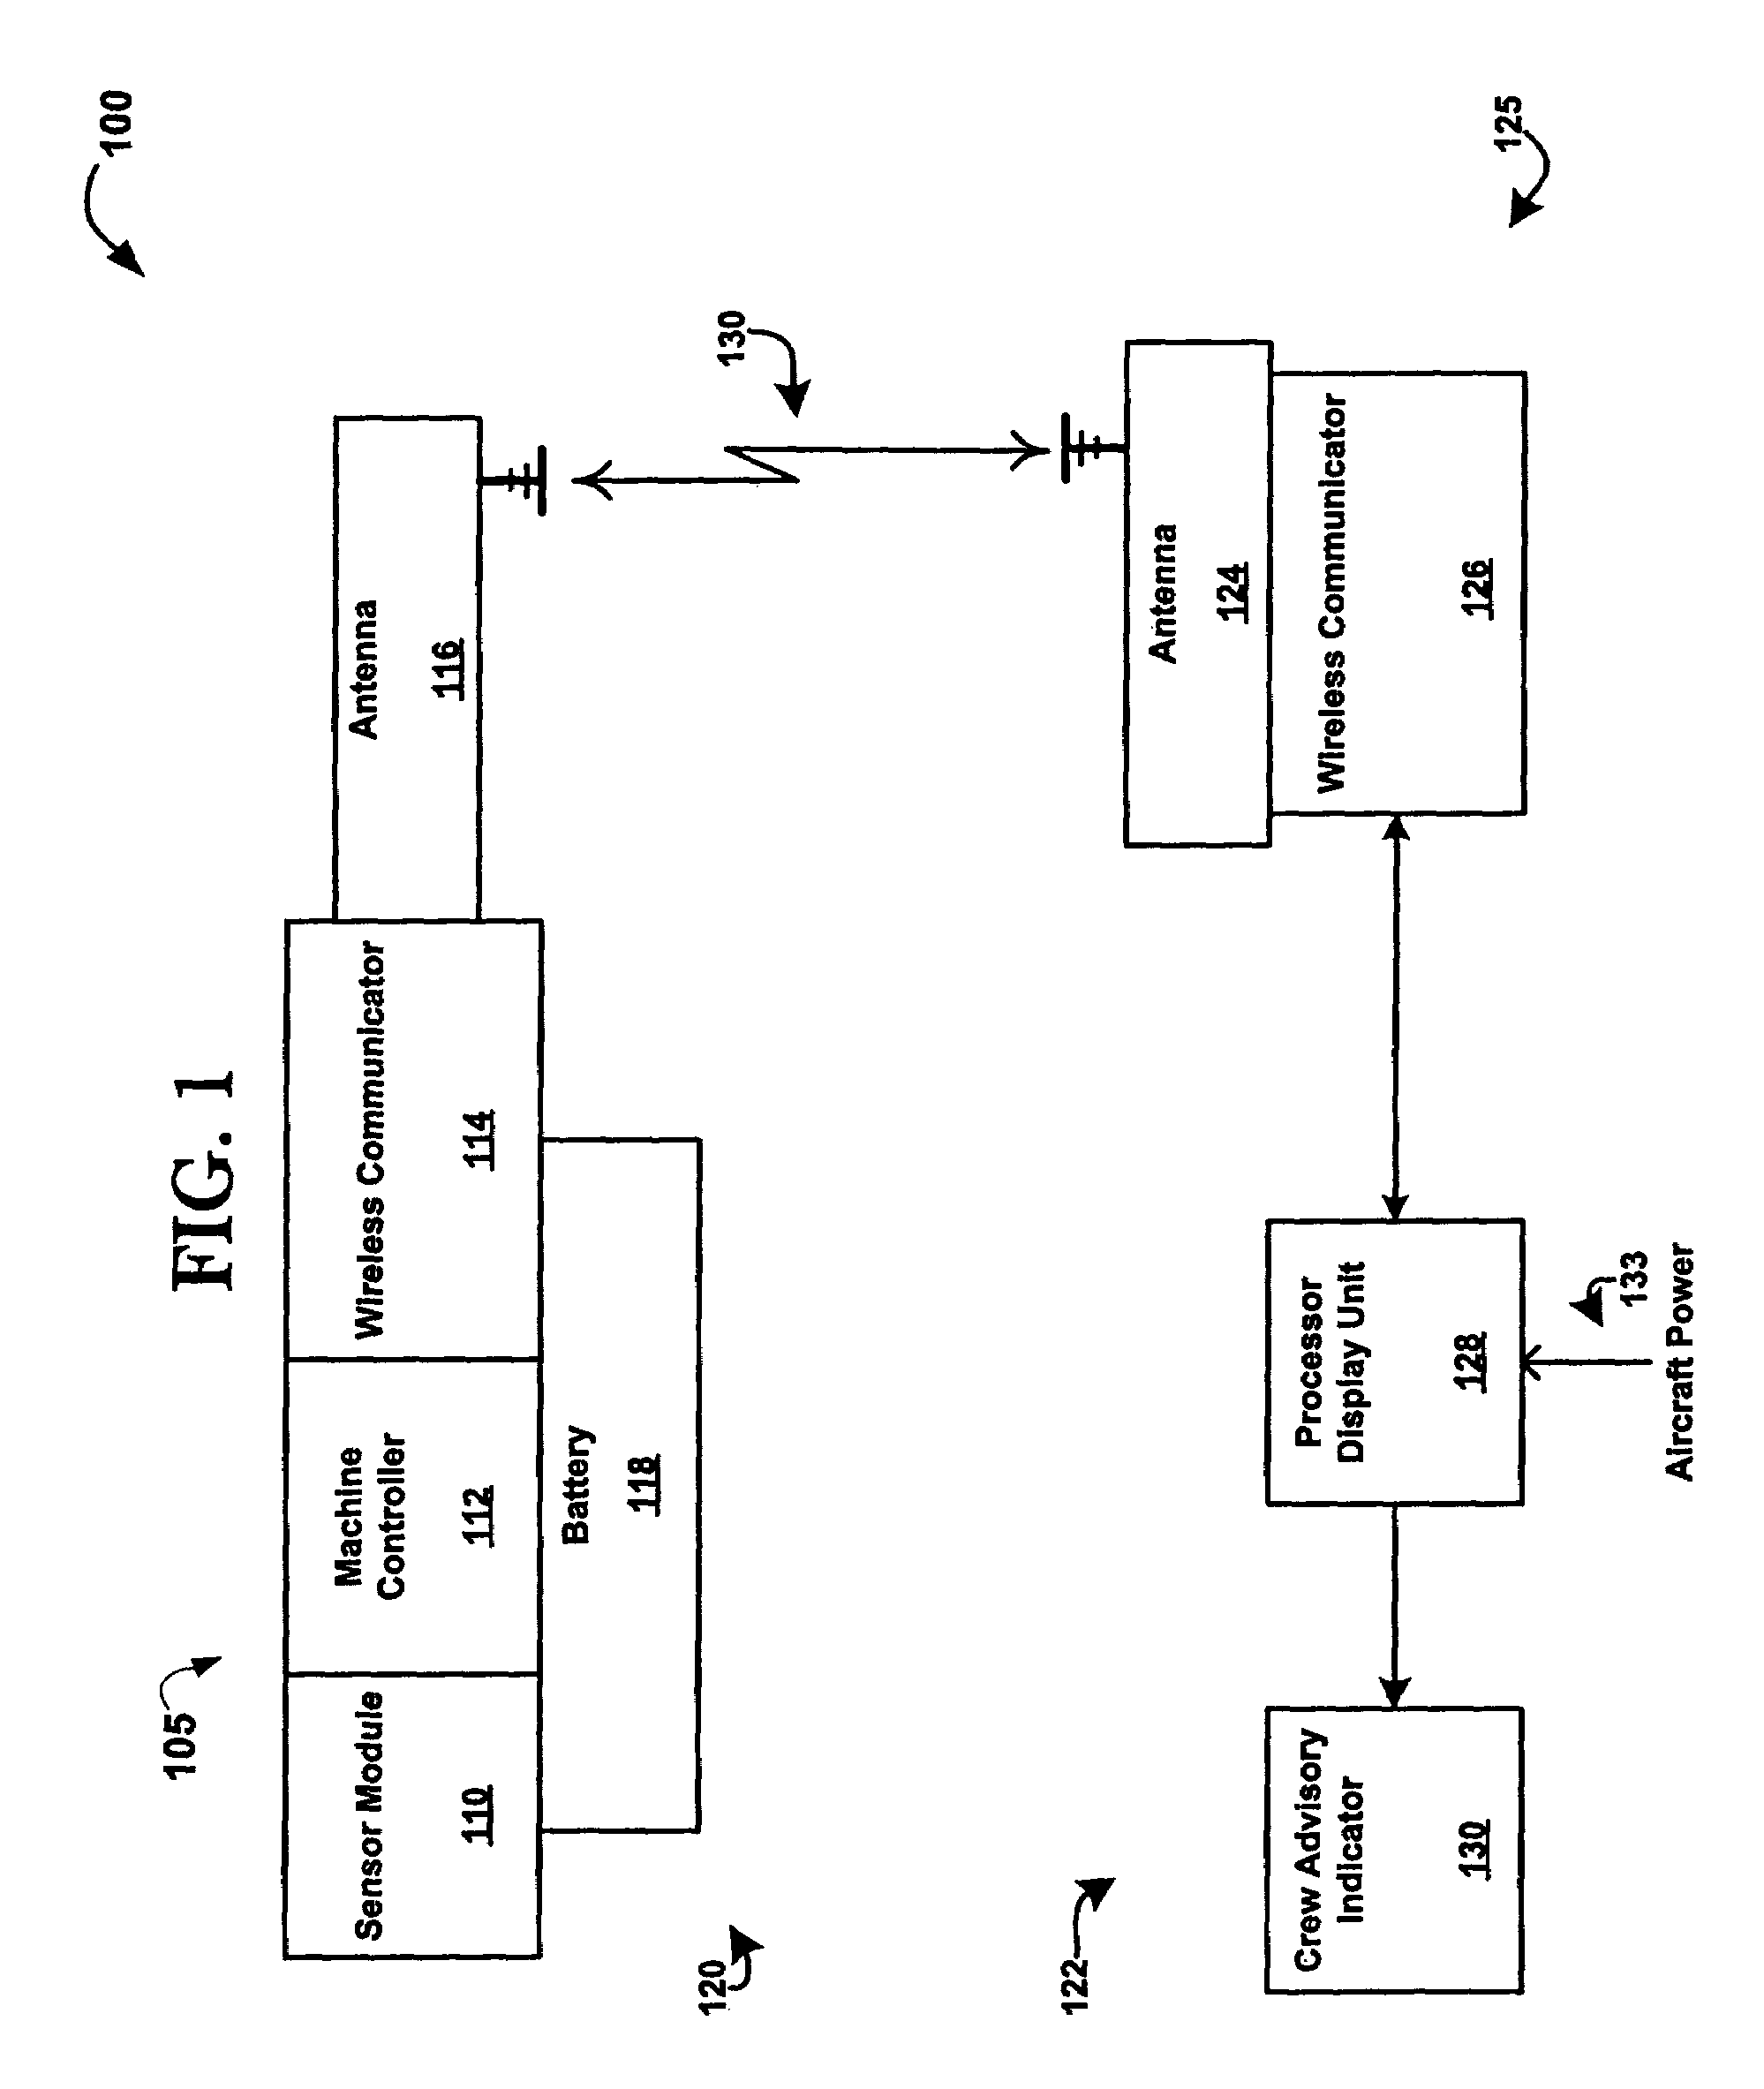 Wireless blade monitoring system and process